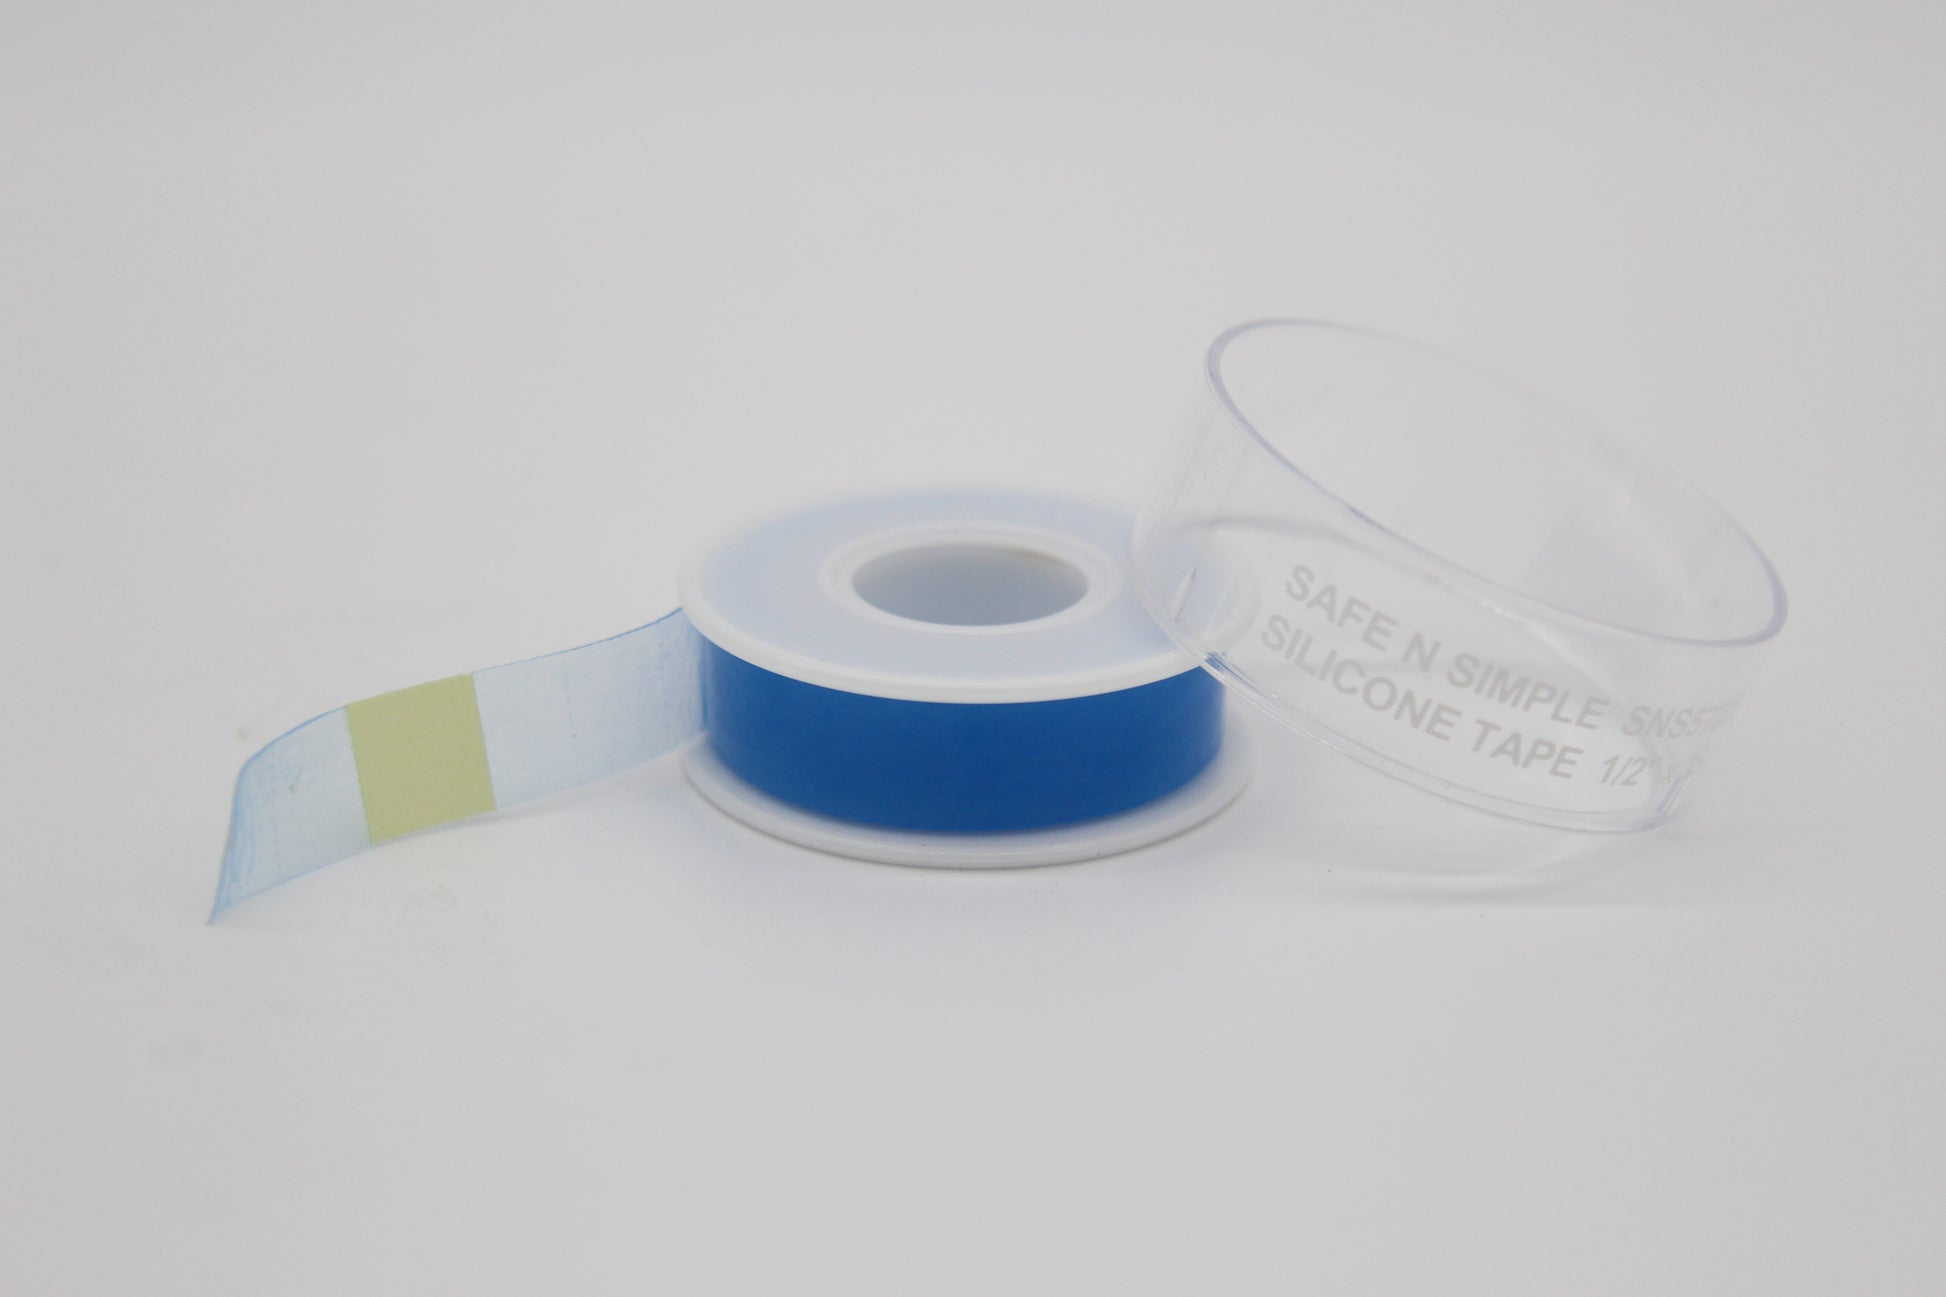 DermaPro Waterproof Silicone Tape | medical products | advanced wound care